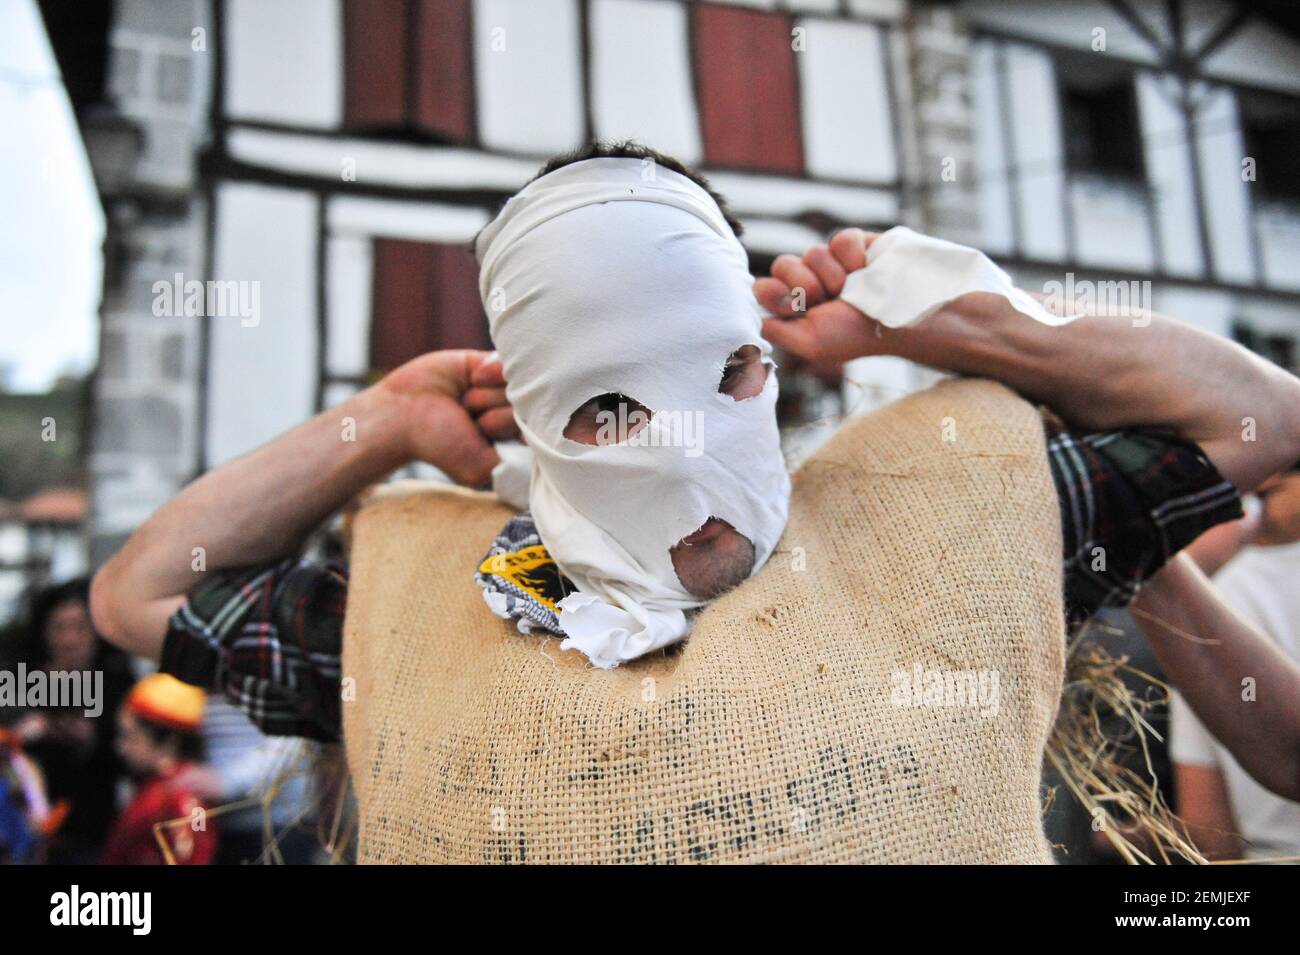 A zakuzaharrak seen making his typical mask, which consists of a white  handkerchief during the Lesaka Carnival. The "zaku-zaharrak" is a  traditional carnival characters festival in the small town of Lesaka.  Stuffed into sacks full of straw with their faces ...